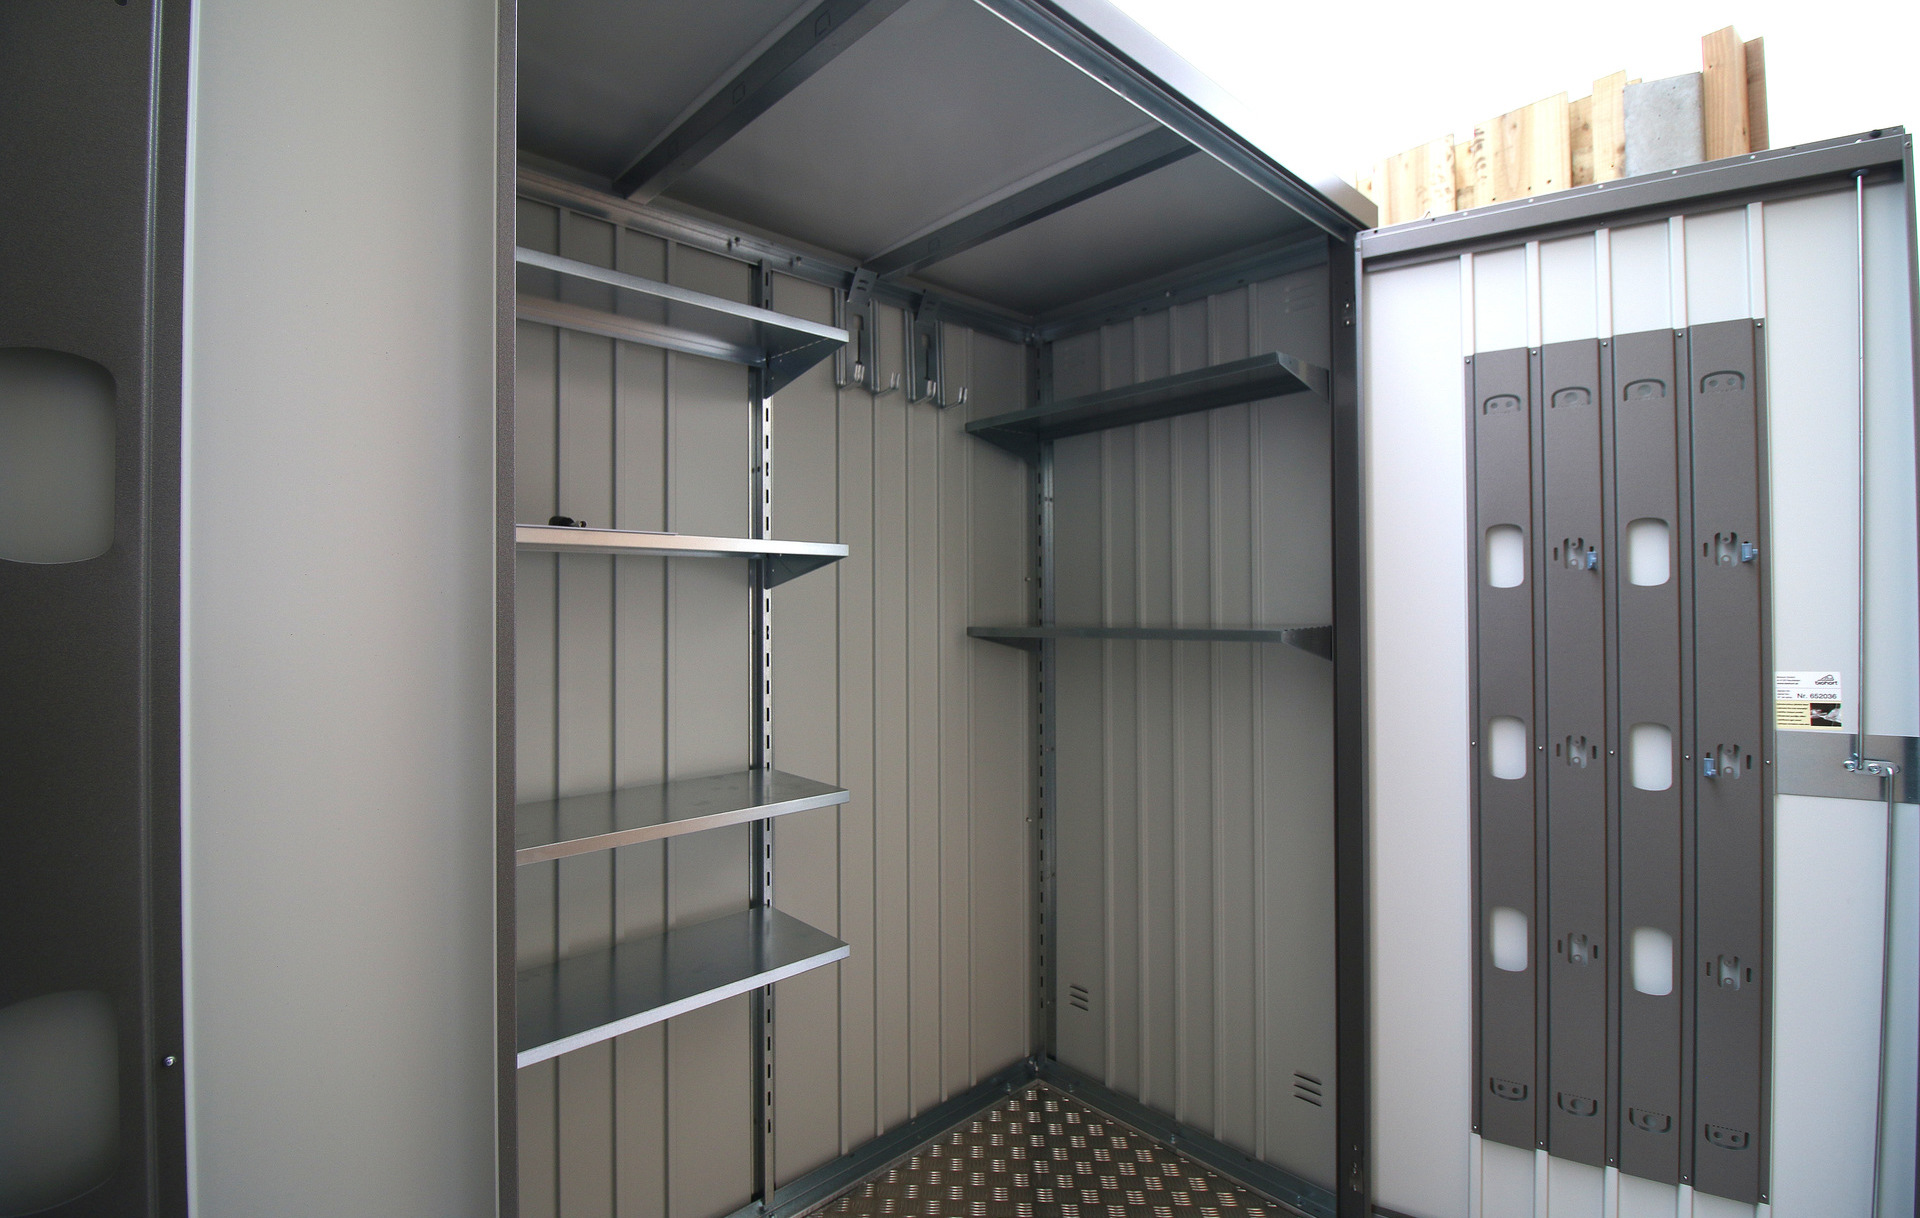 The superb quality and style of the Biohort Equipment Locker 150 in metallic quartz grey with optional accessories including aluminium floor frame, aluminium floor panels, additional shelving etc | supplied + installed in Beaumont, Dublin 9 by Owen Chubb Landscapers. Ireland's # 1 Biohort Dealer and Biohort Certified Installation Partner. Tel 087-2306 128.